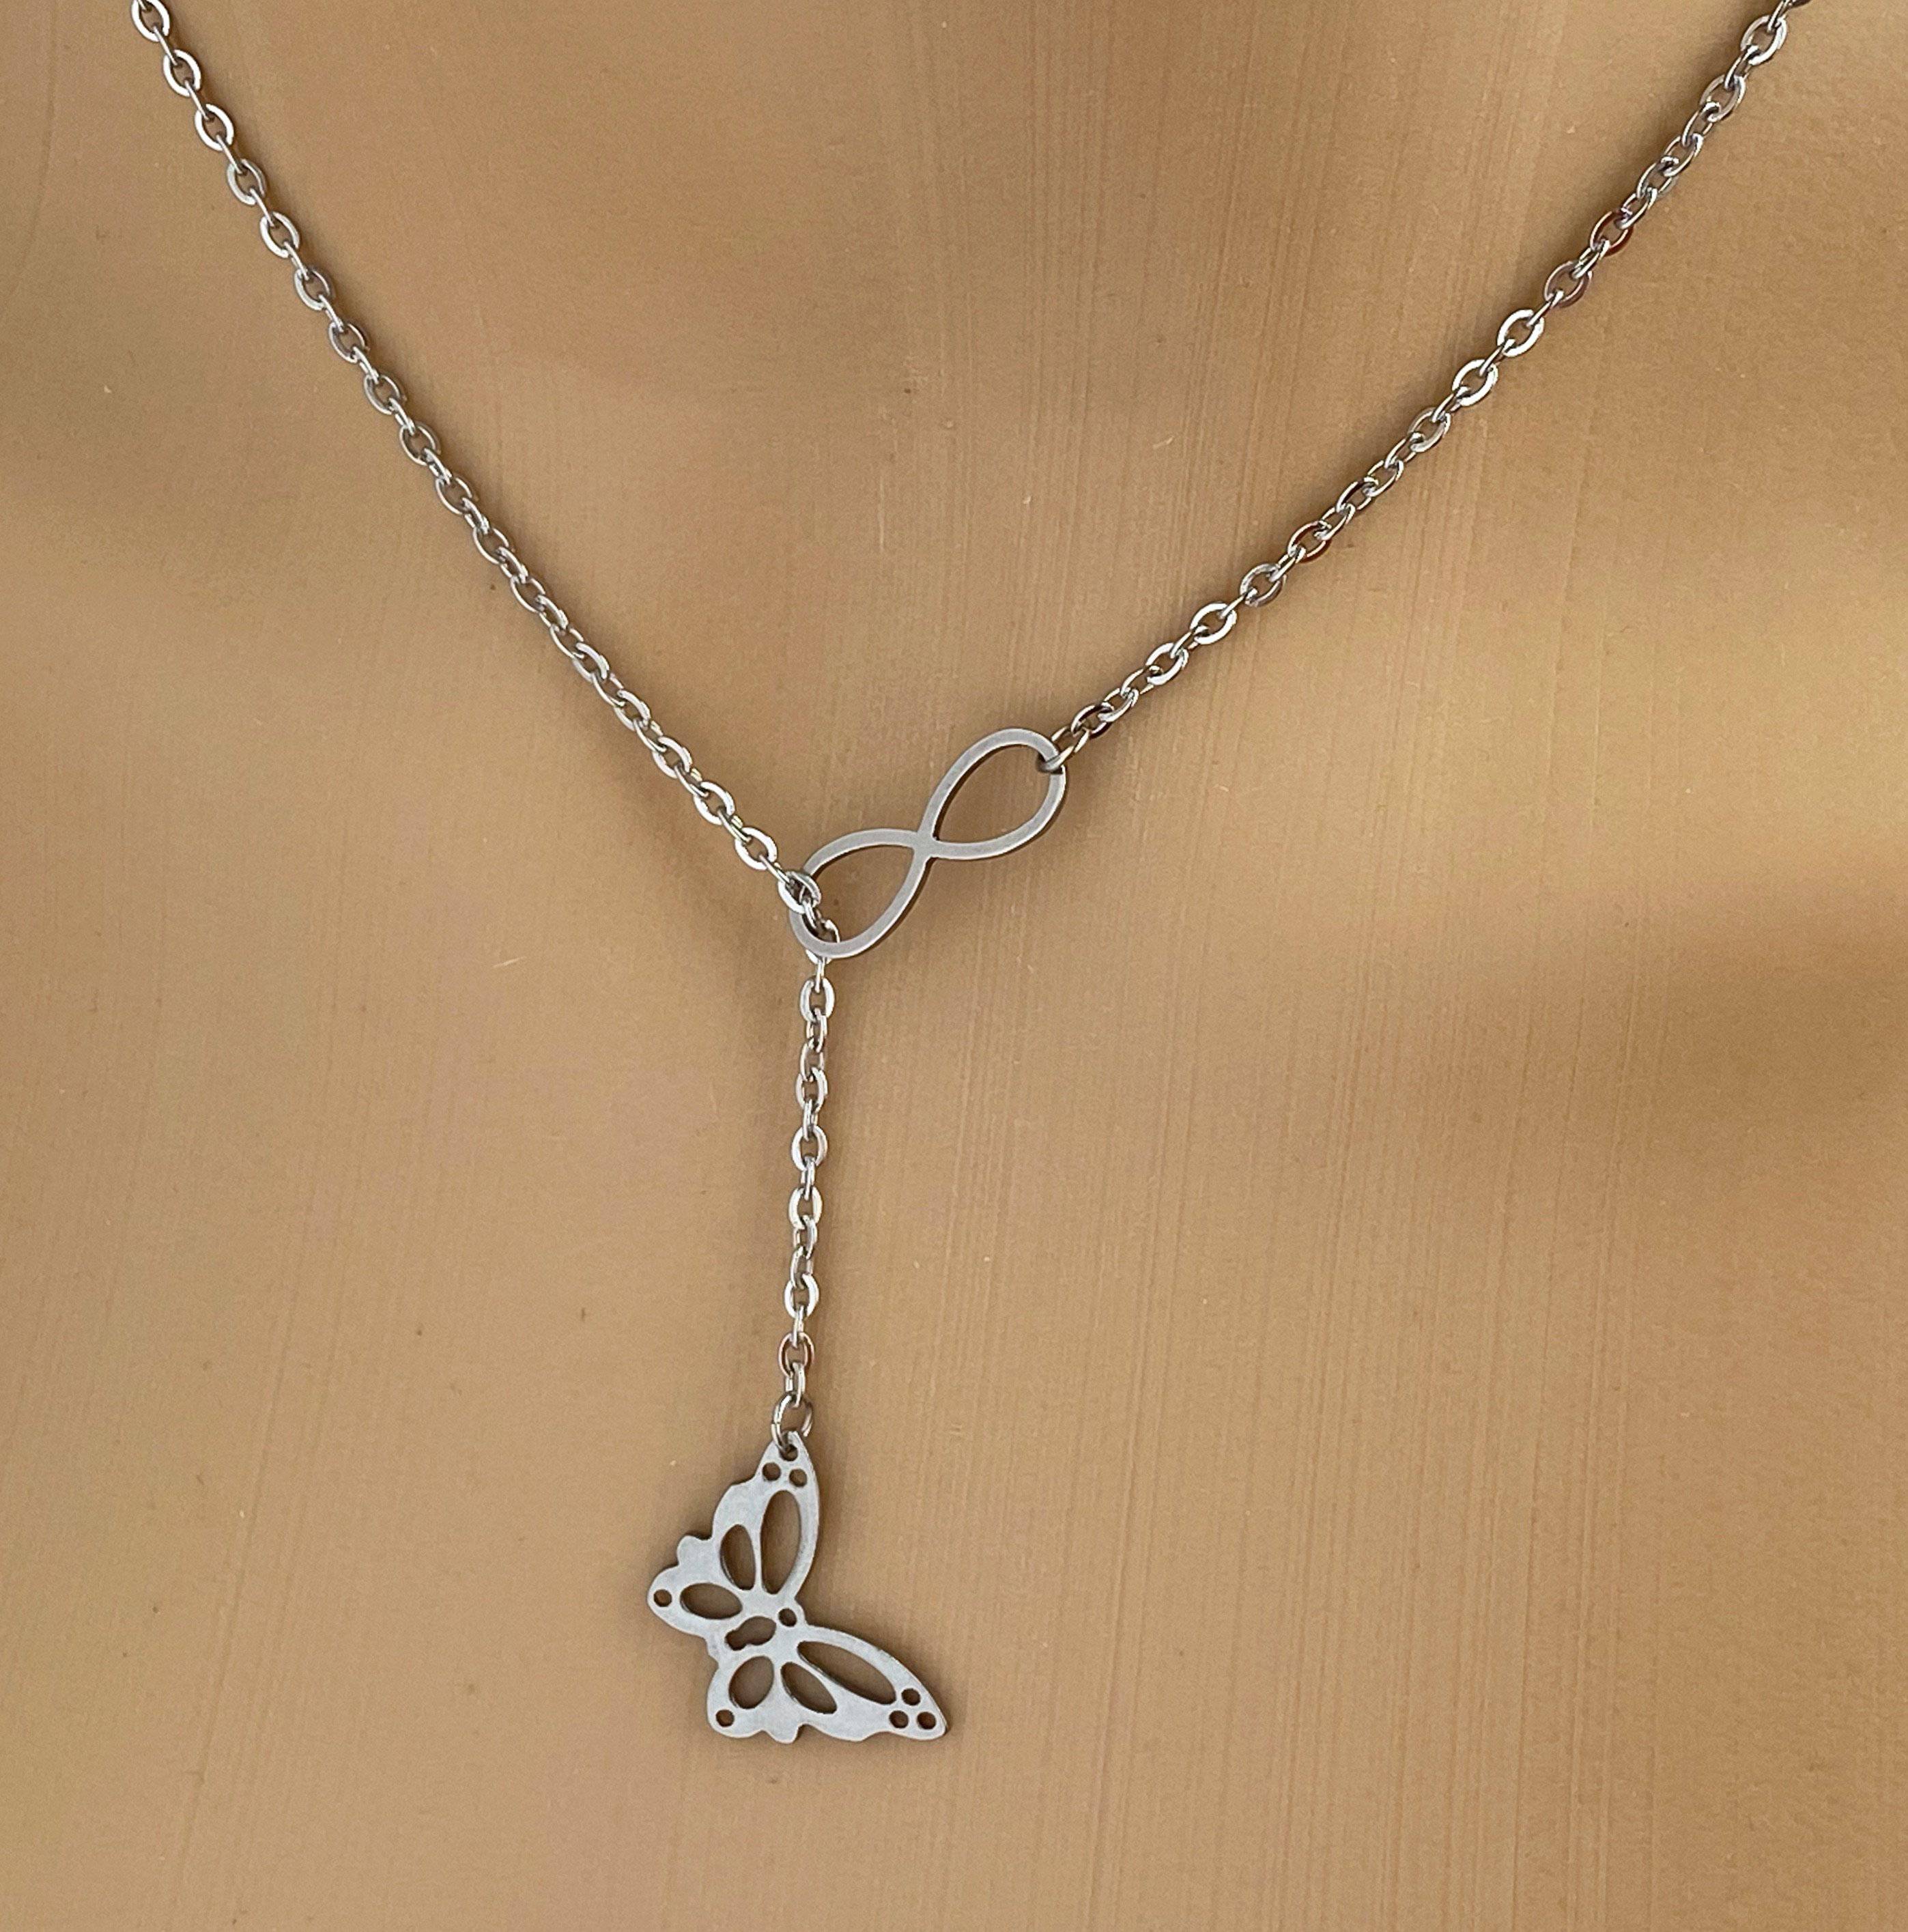 Butterfly Lock Chain Necklace Silver